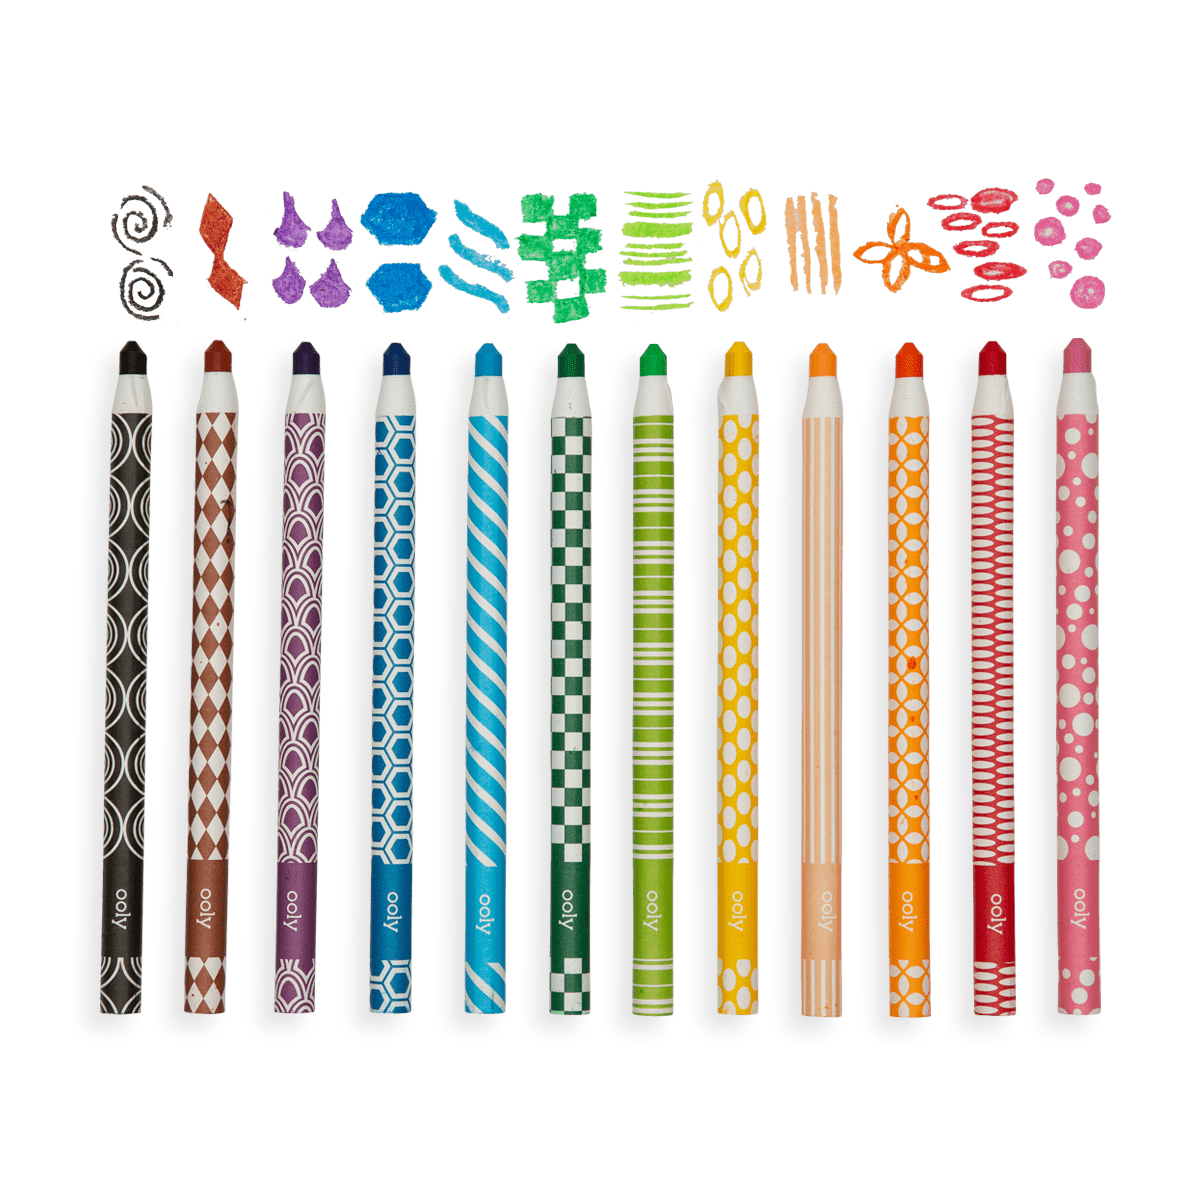 OOLY Color Appeel Crayons by OOLY